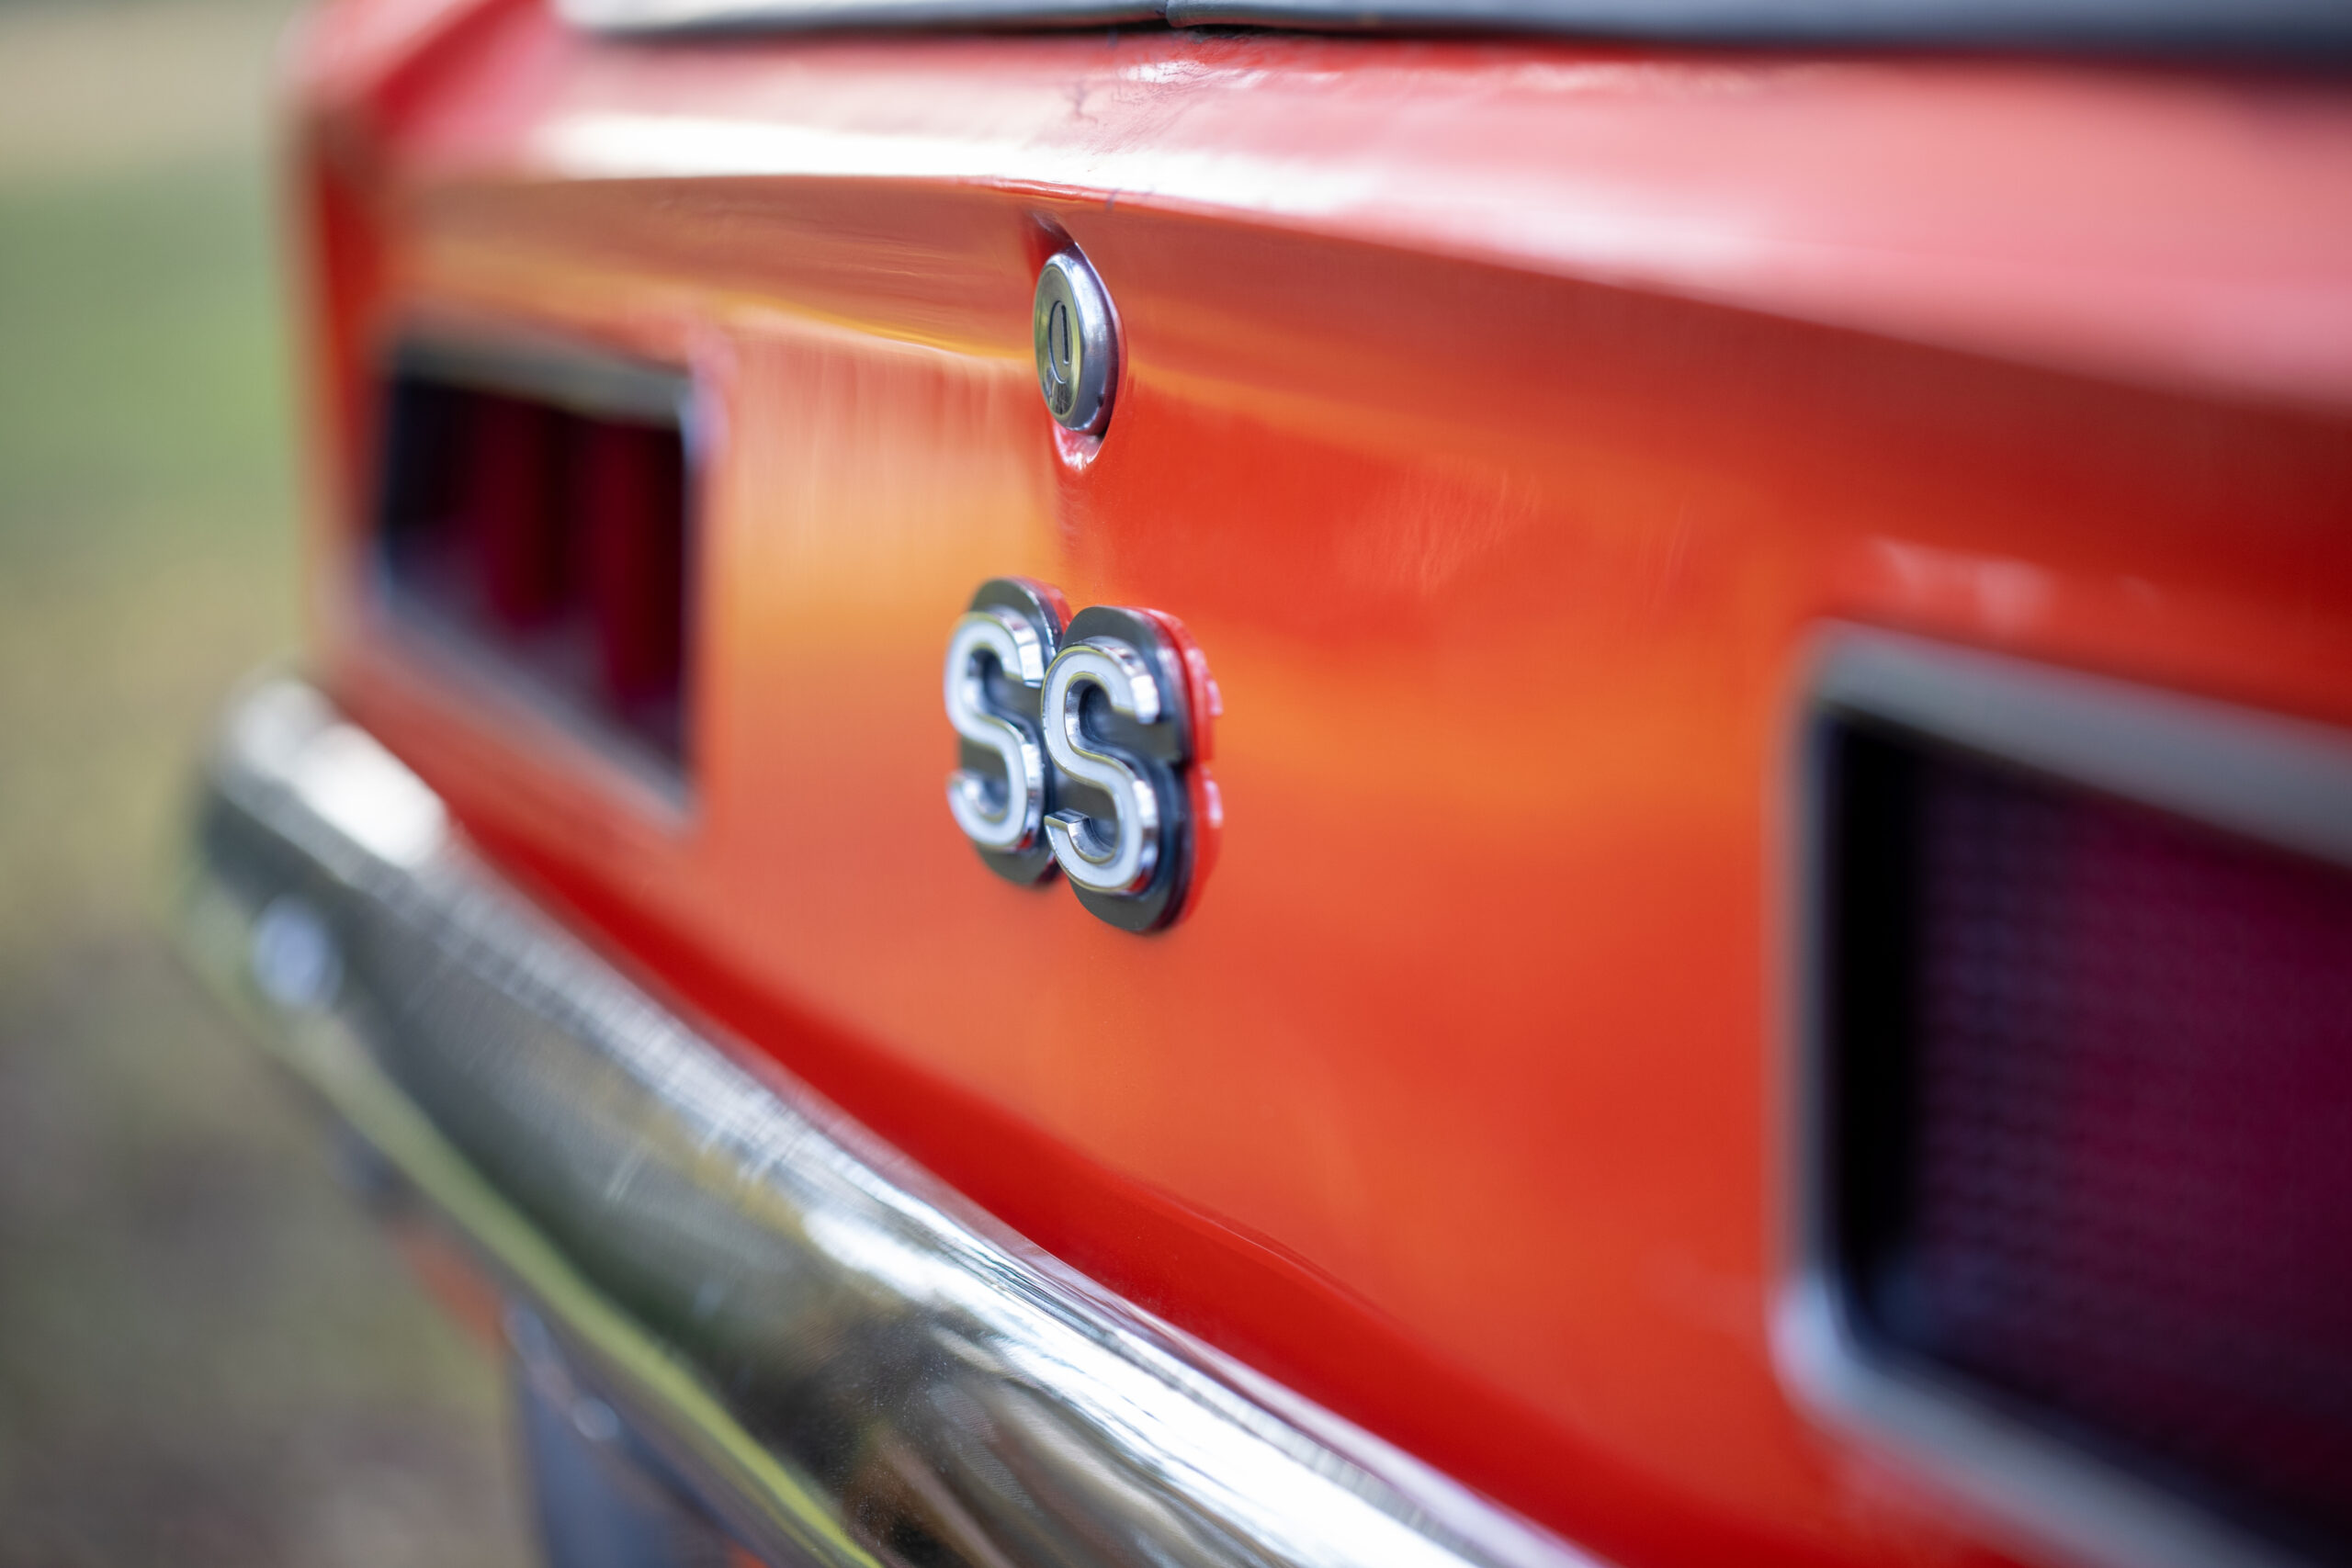 Close-up of the rear of a vintage orange car with a chrome "SS" emblem visible, along with part of the rear bumper and taillight area.